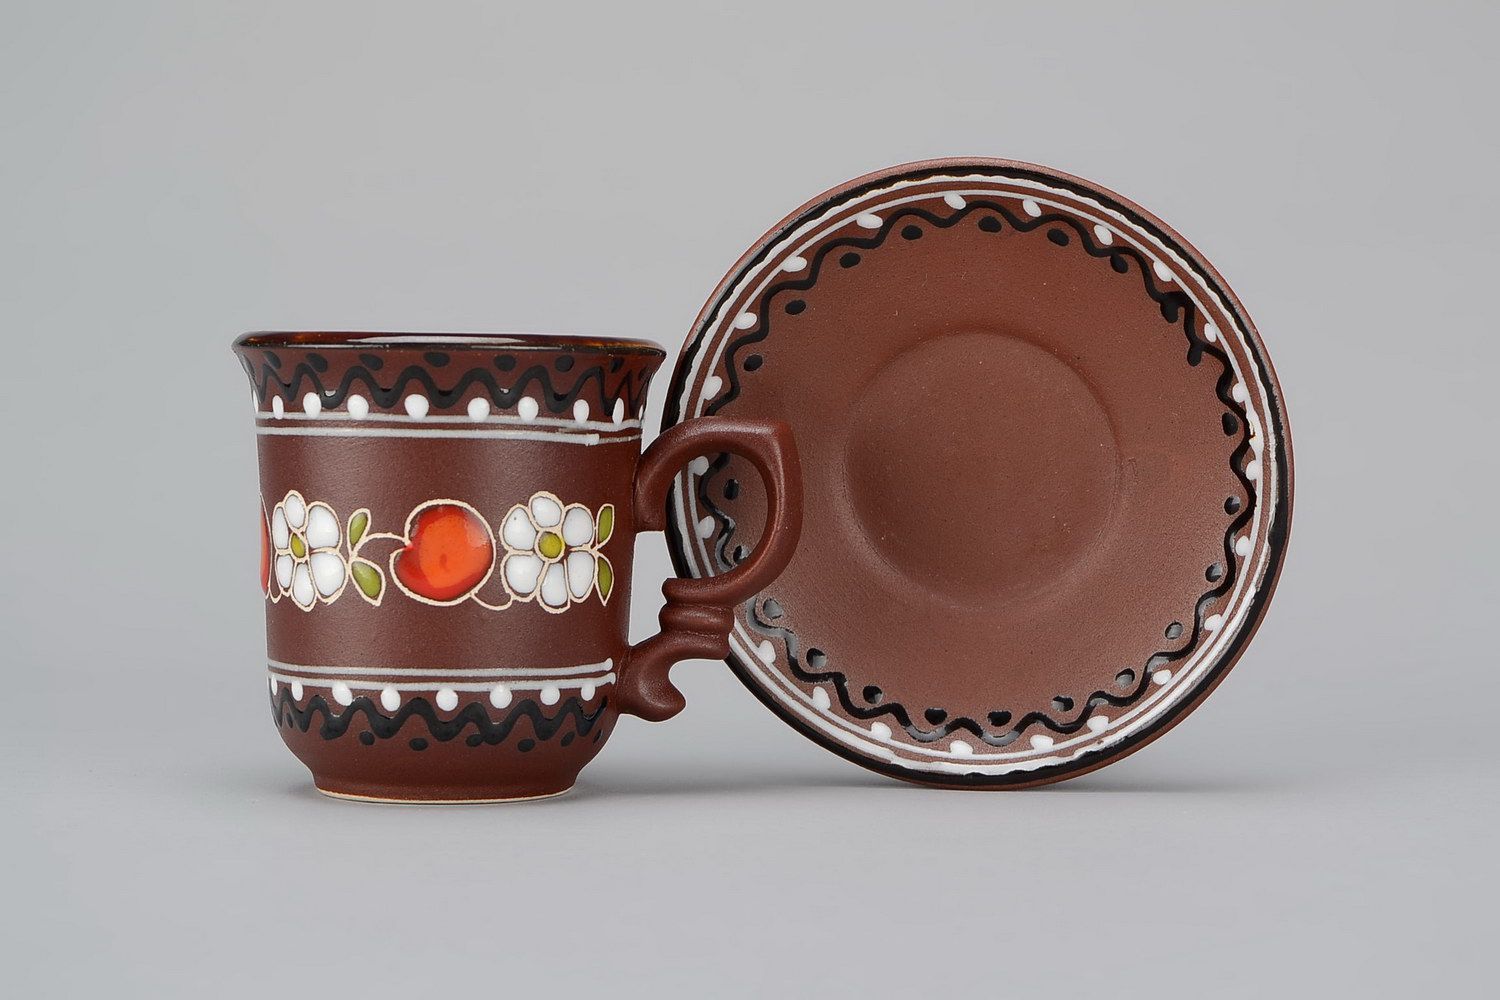 2 oz ceramic glazed decorative brown espresso cup with handle, saucer, and floral pattern photo 3